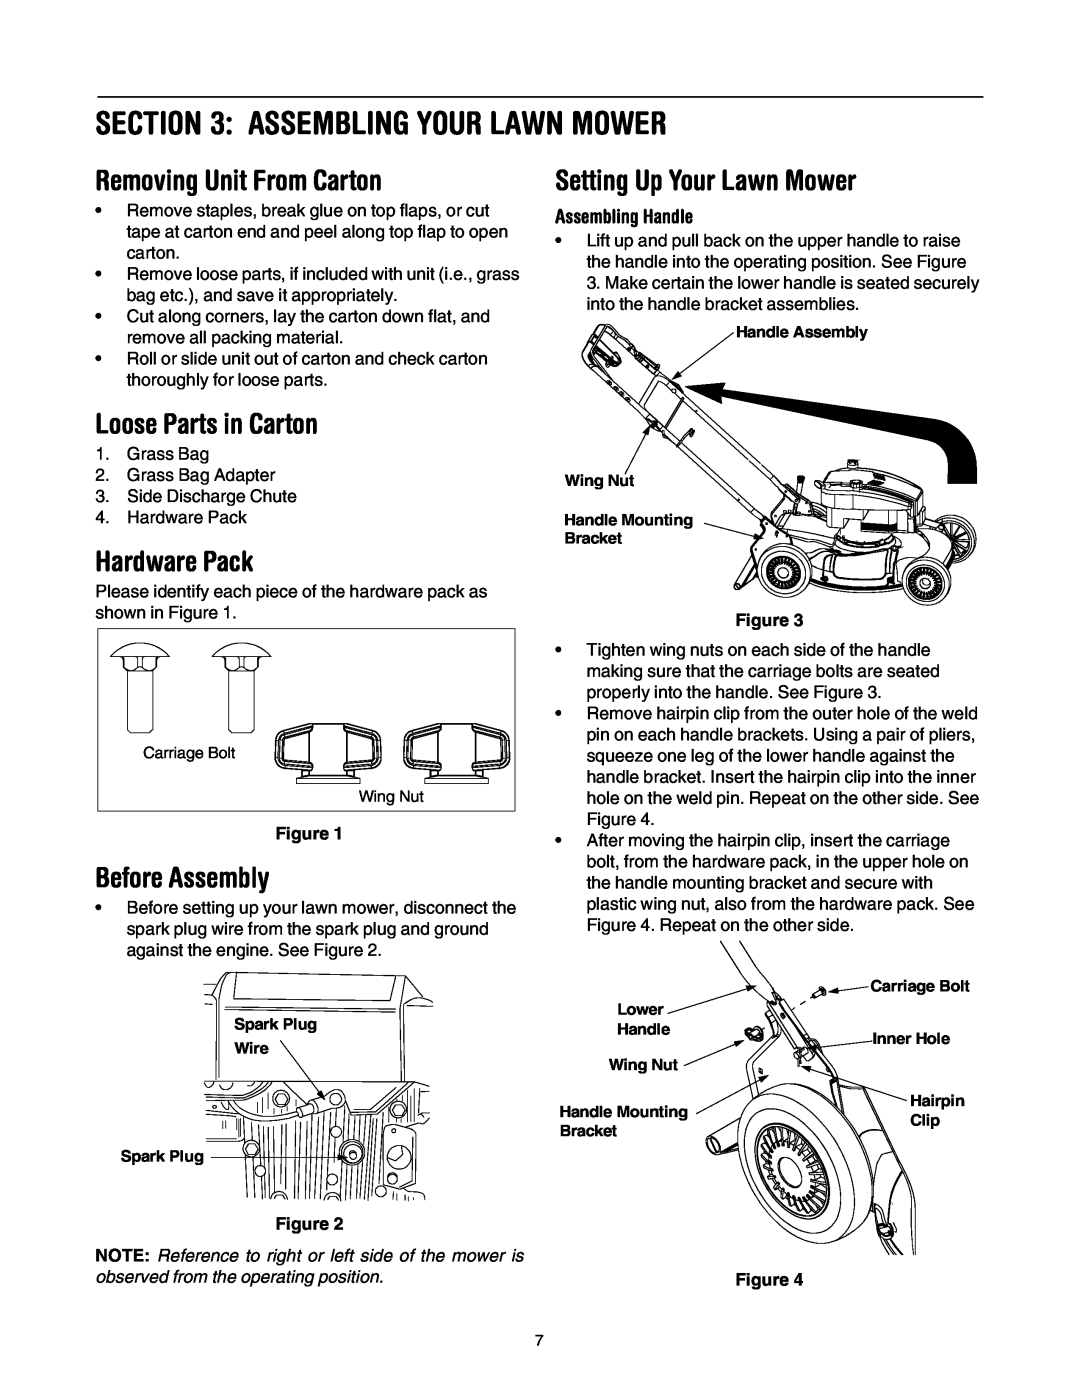 Cub Cadet E977C, 977A manual Assembling Your Lawn Mower, Removing Unit From Carton, Loose Parts in Carton, Hardware Pack 